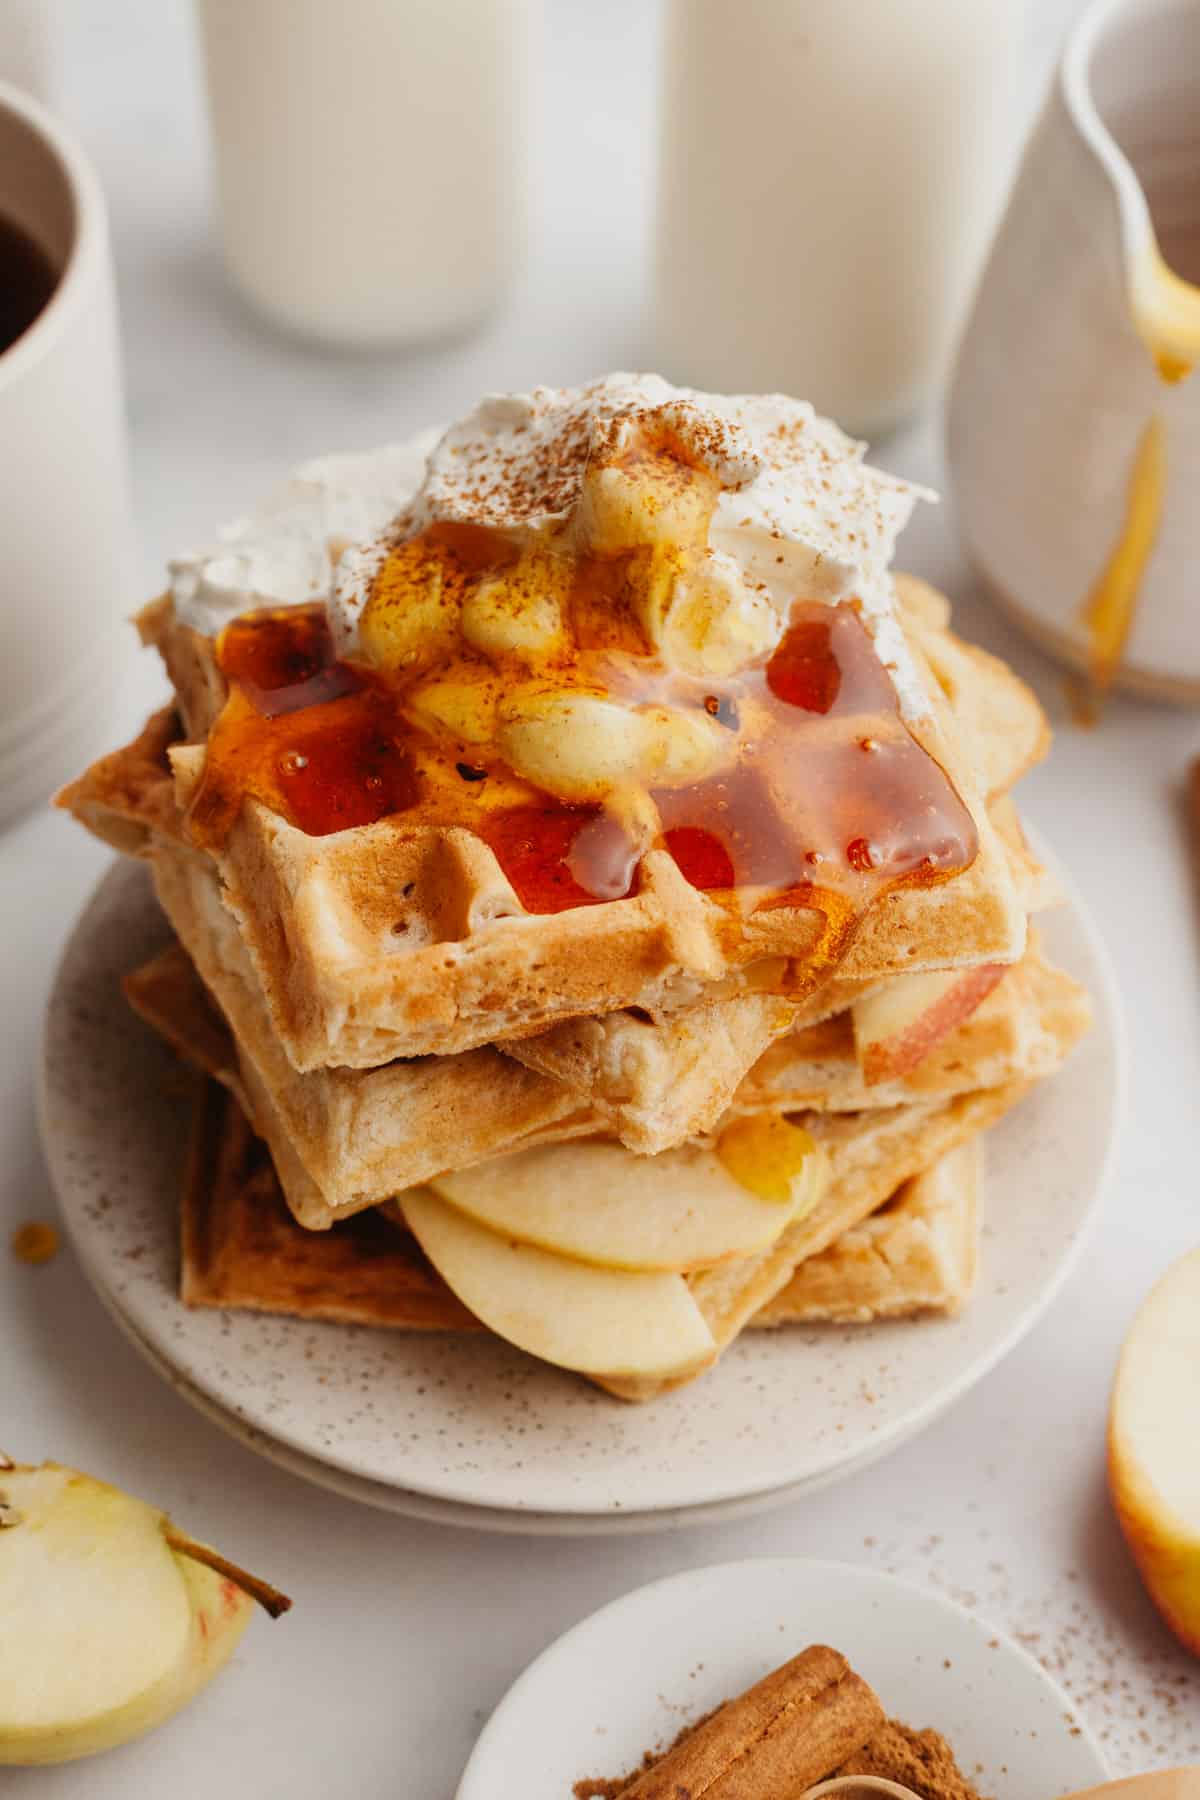 A stack of waffles with slices of apples and whipped cream.